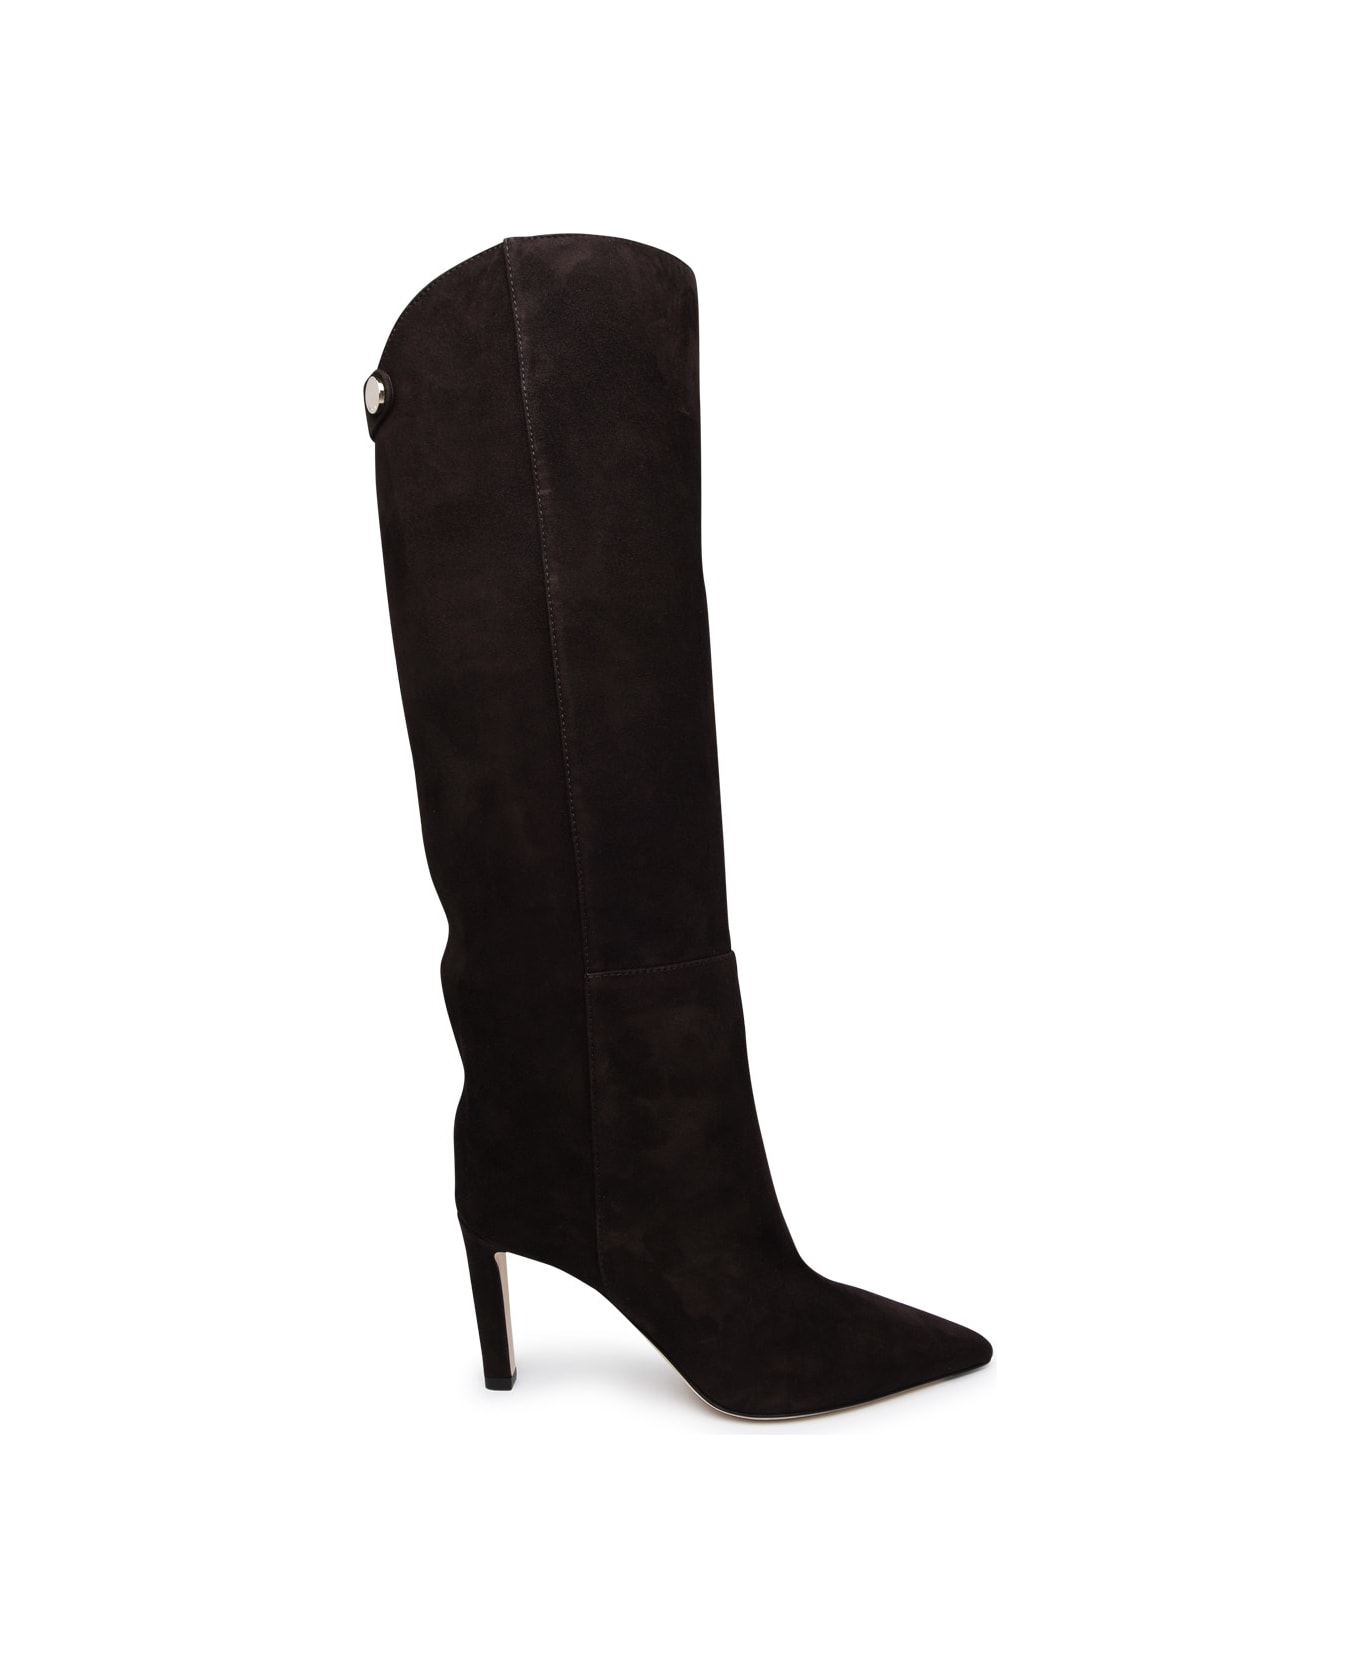 Jimmy Choo Alizze Coffee Suede Boots - Brown ブーツ